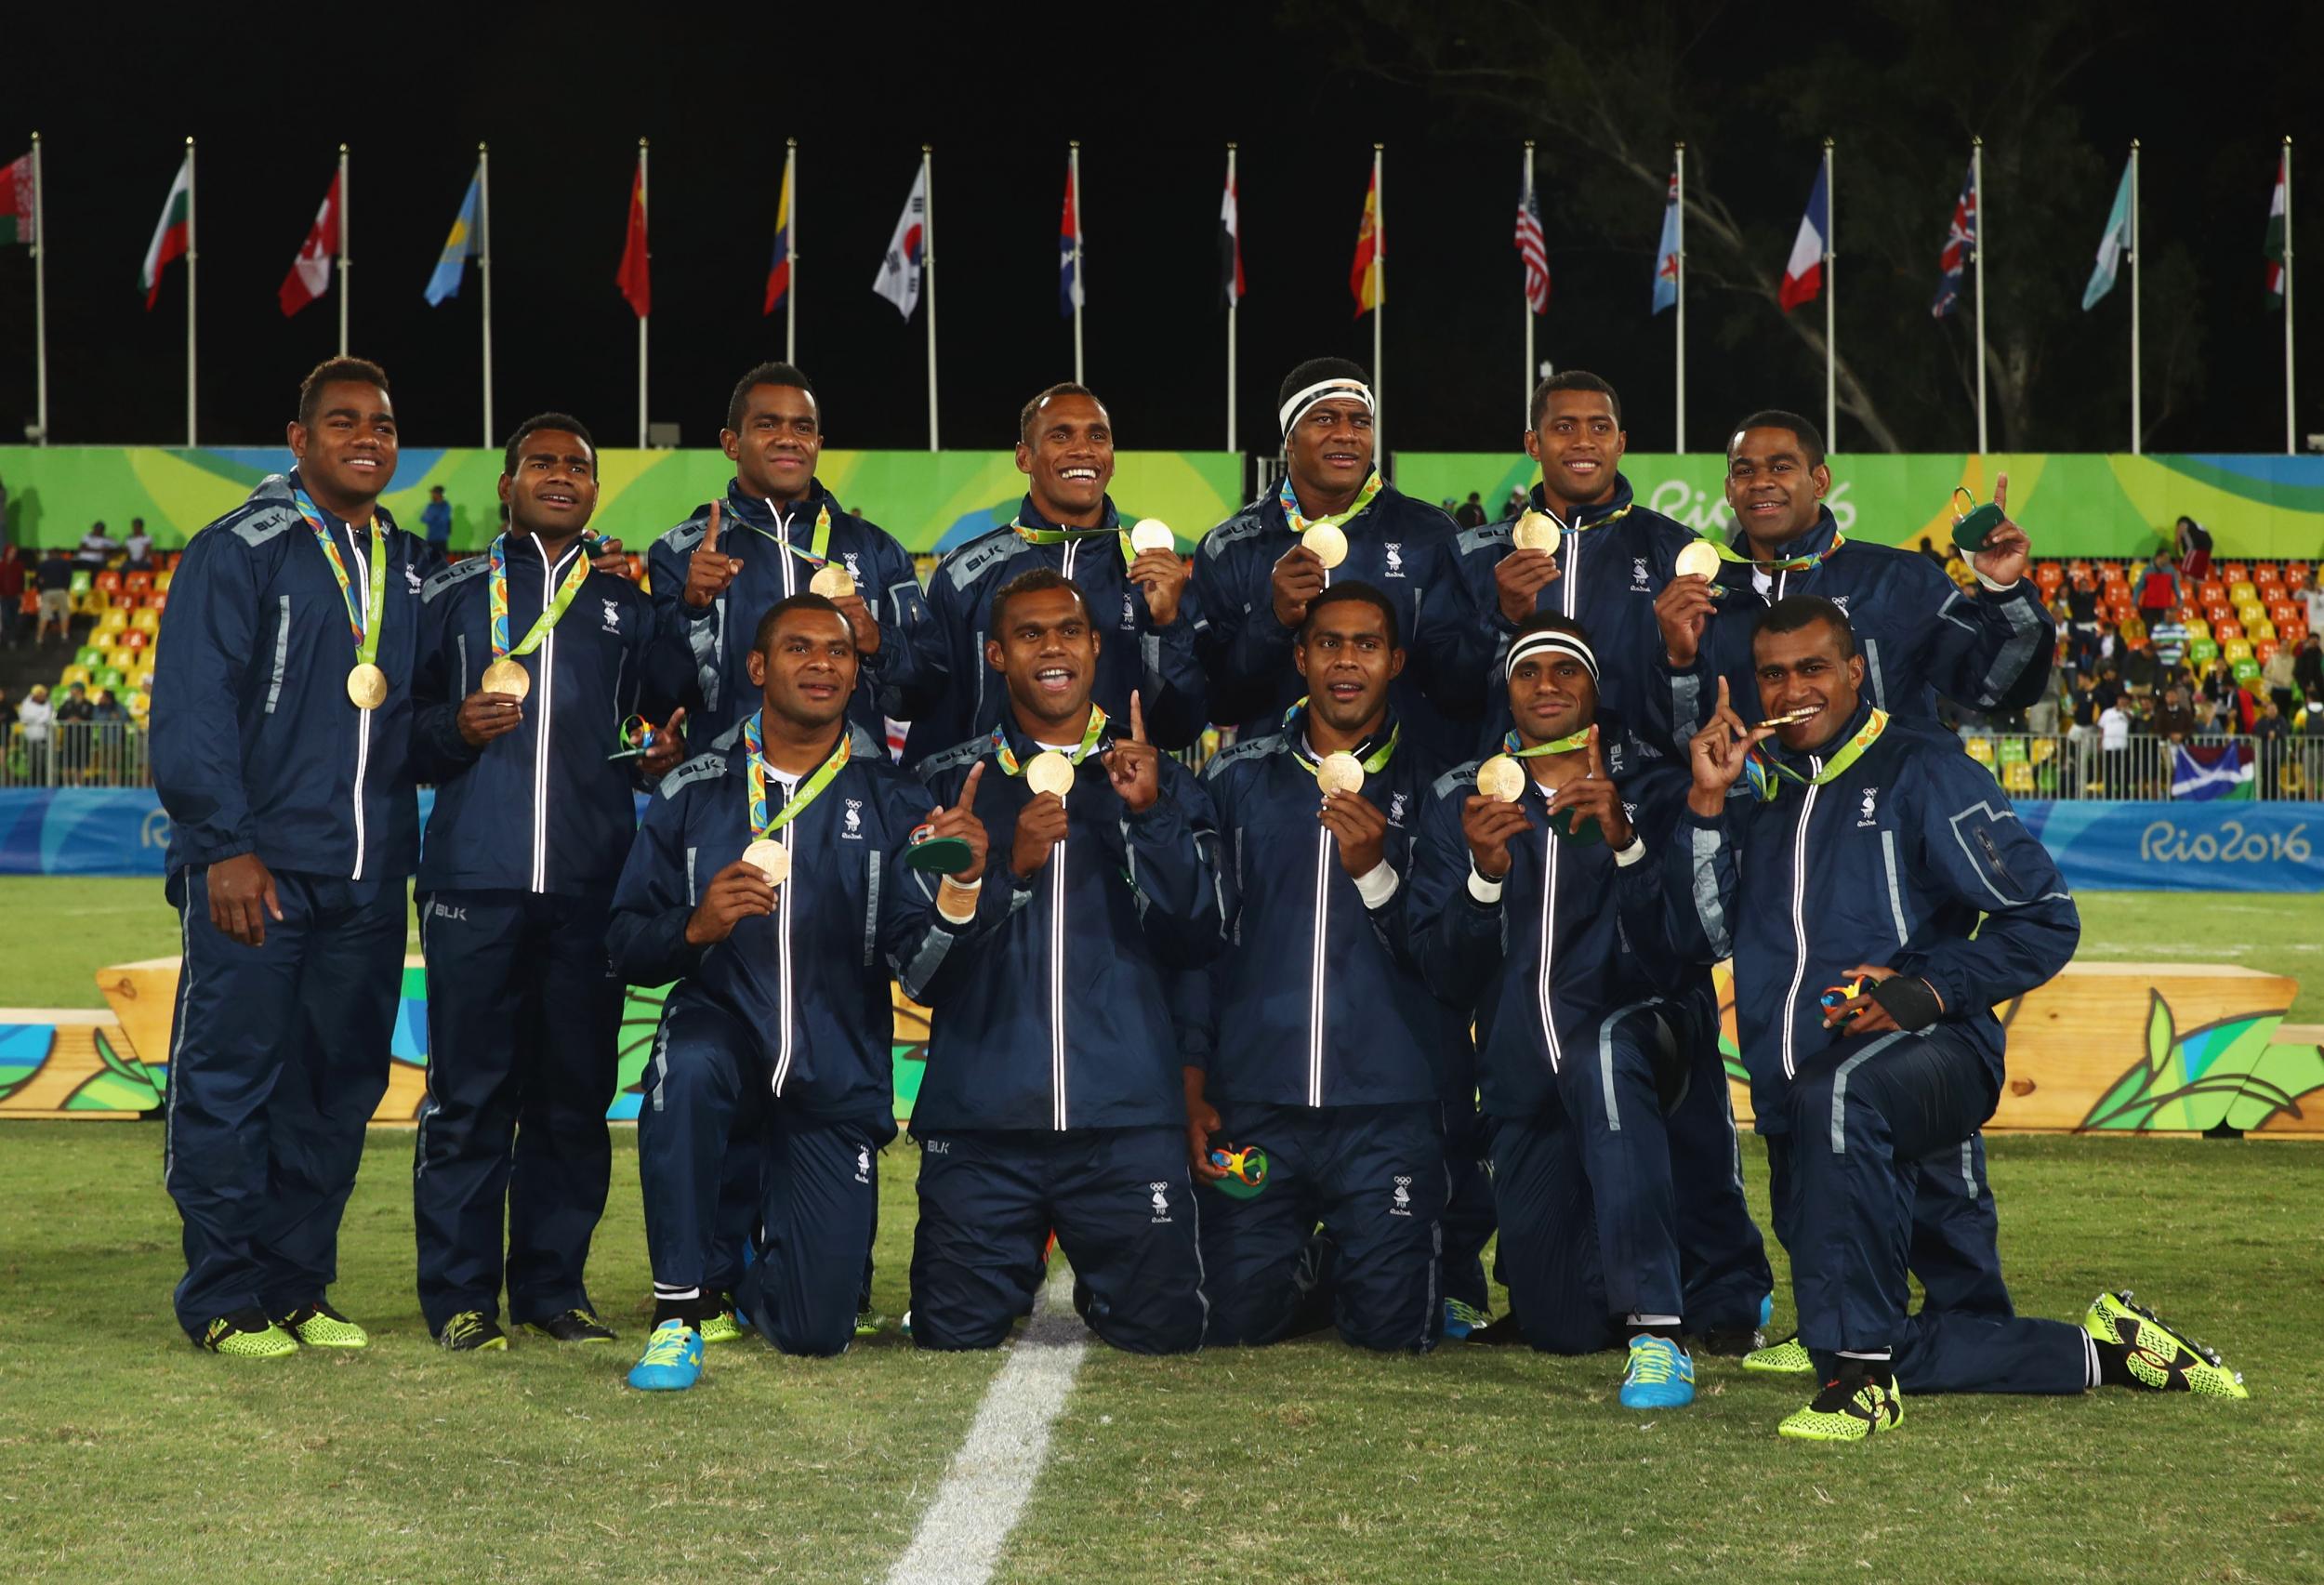 The Fiji rugby sevens team with their gold medals